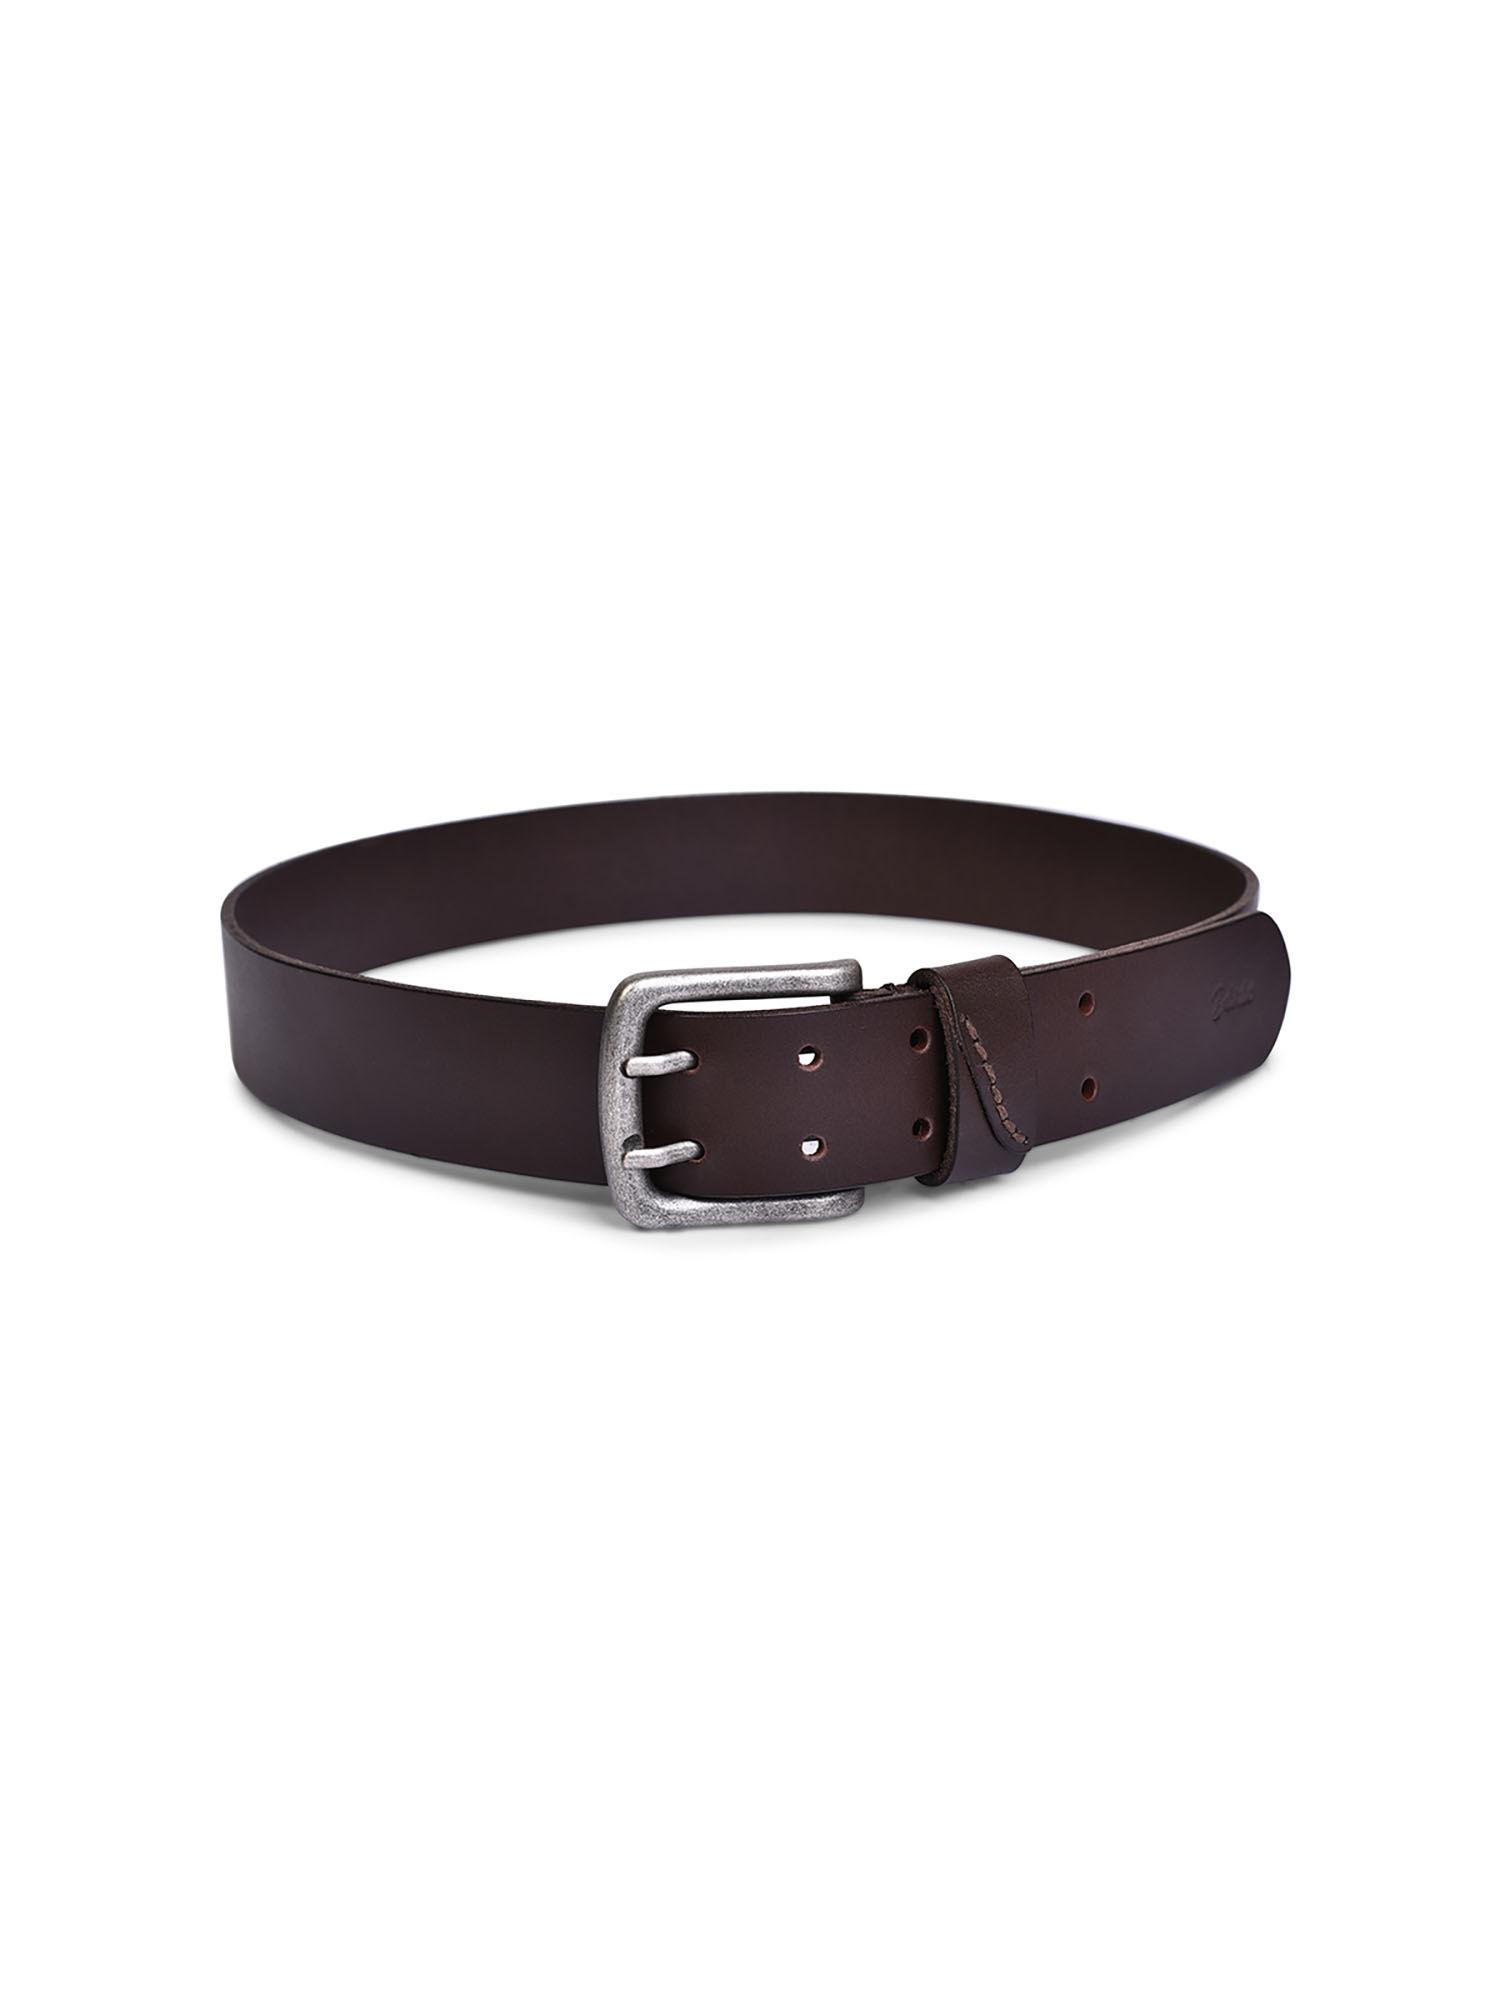 genuine leather chocolate brown mens belt with antique silver finished buckle